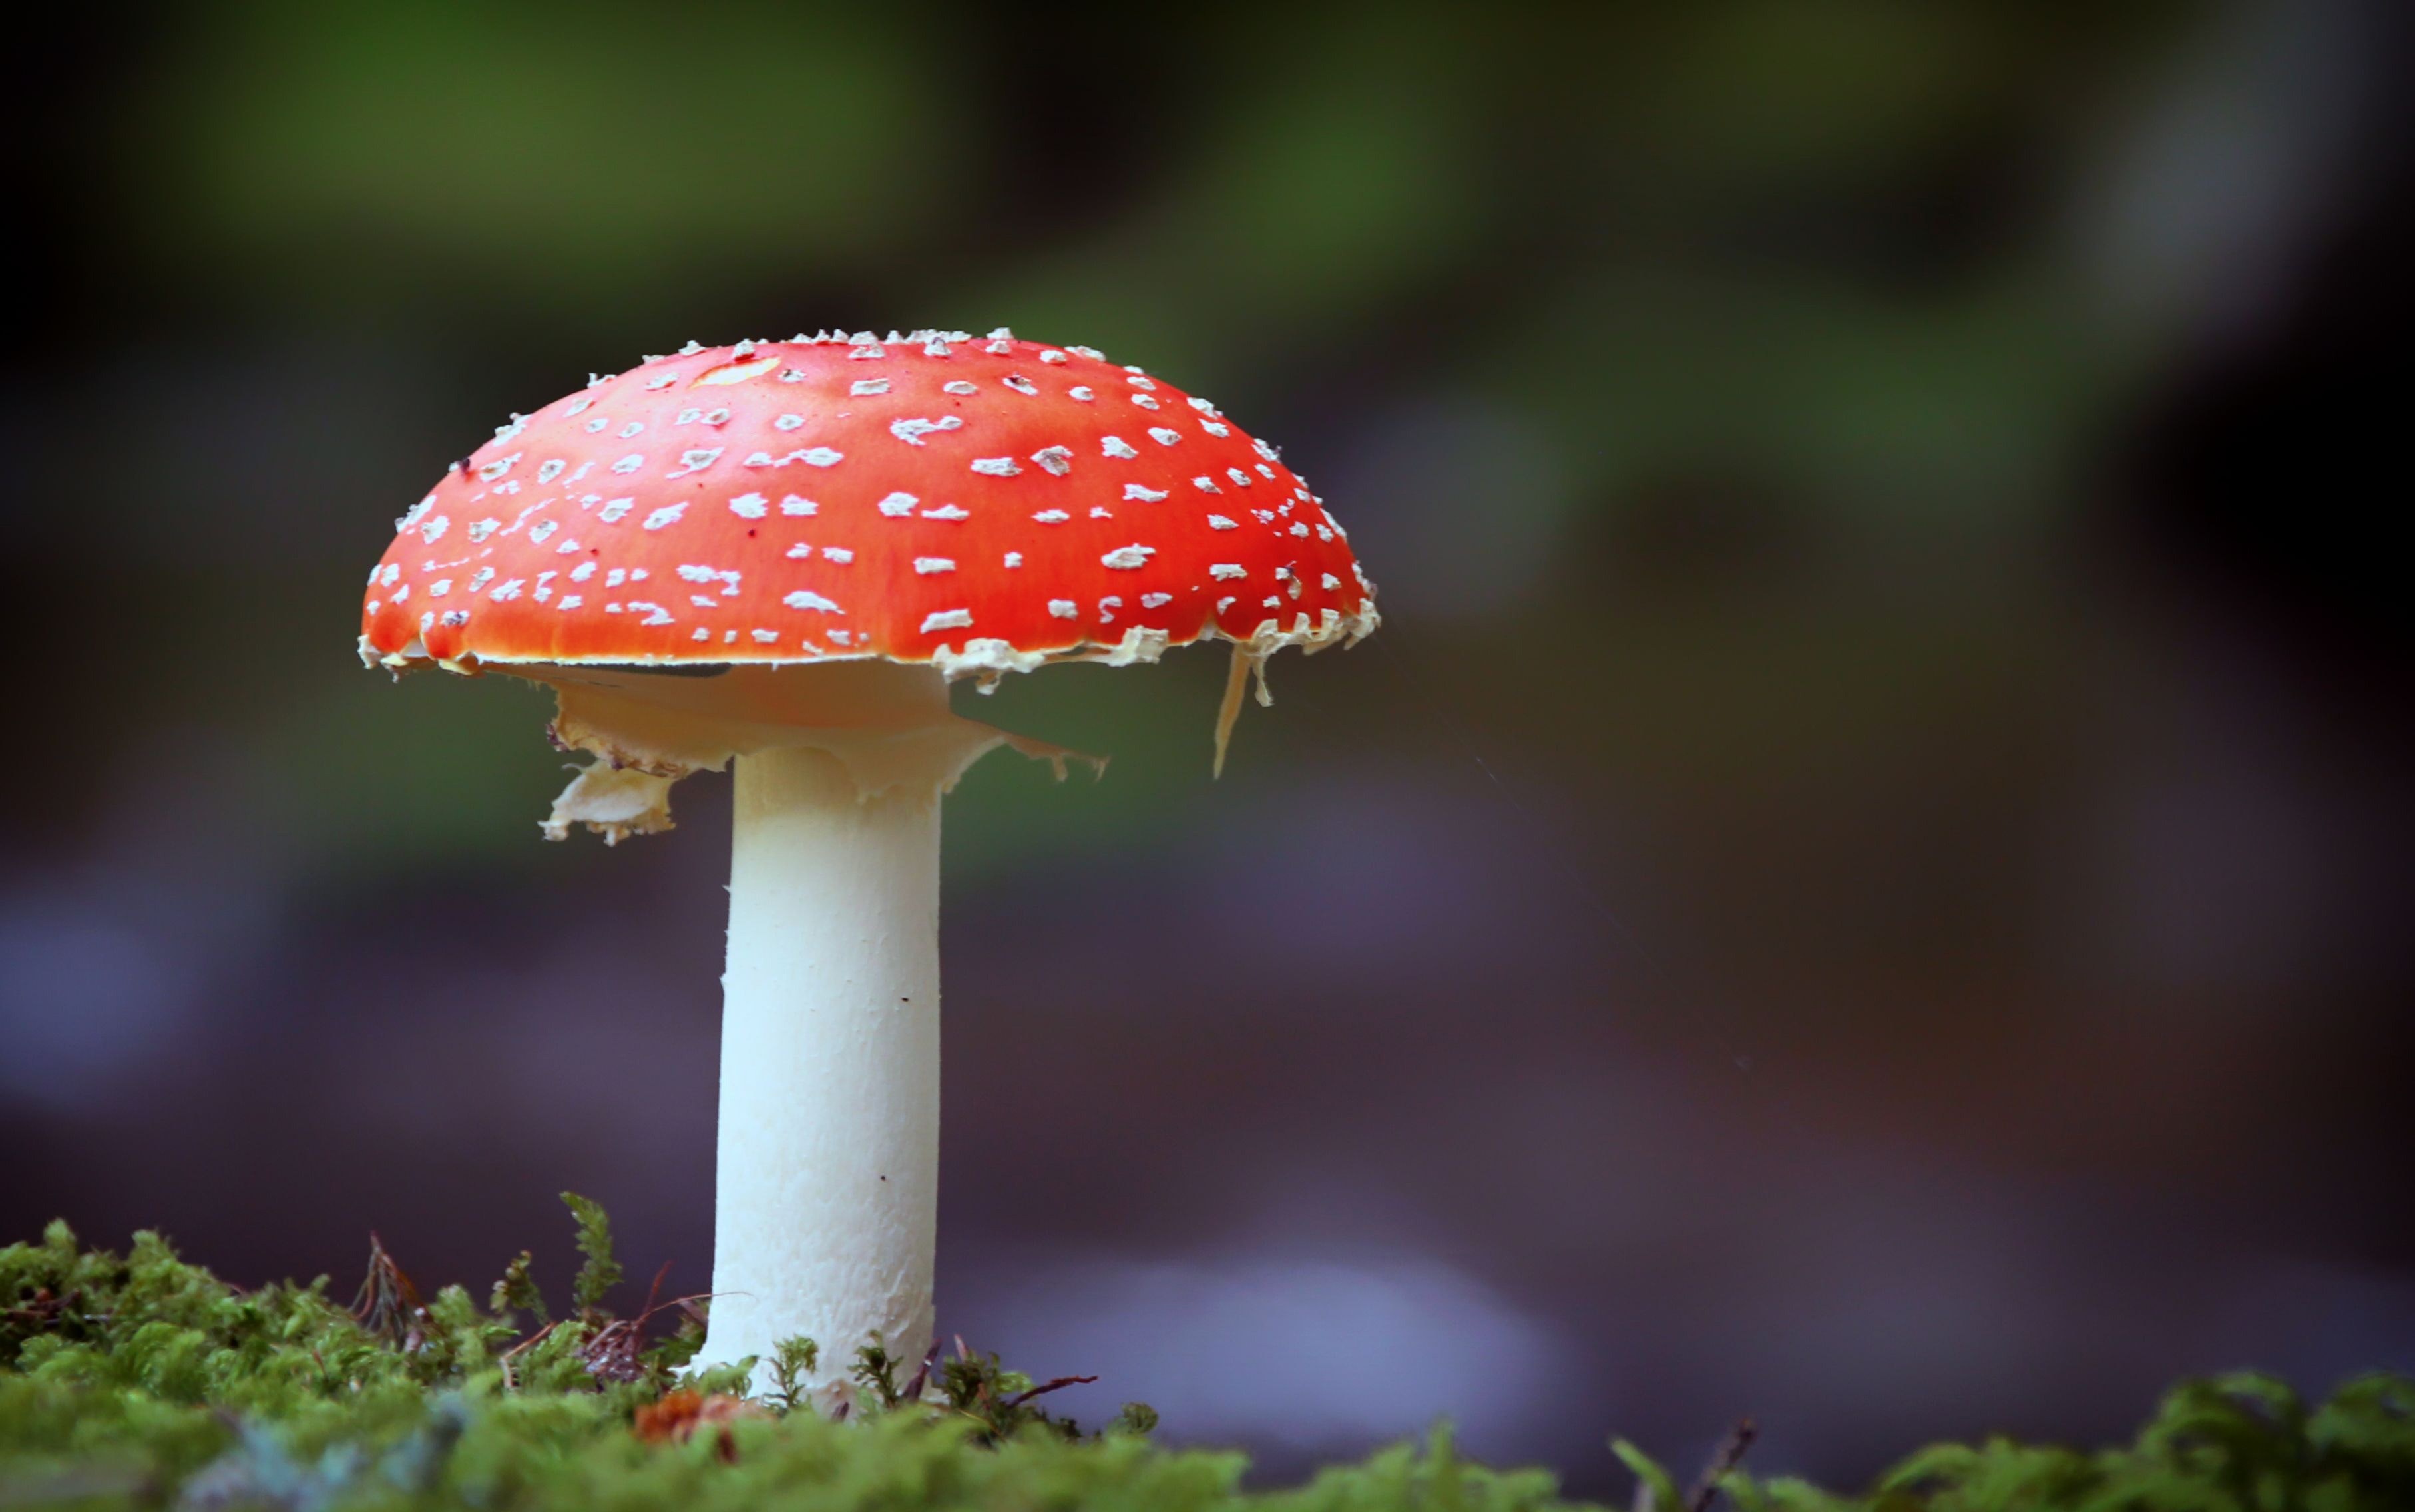 Red and White Mushroom on Green Grass during Daytime · Free Stock Photo